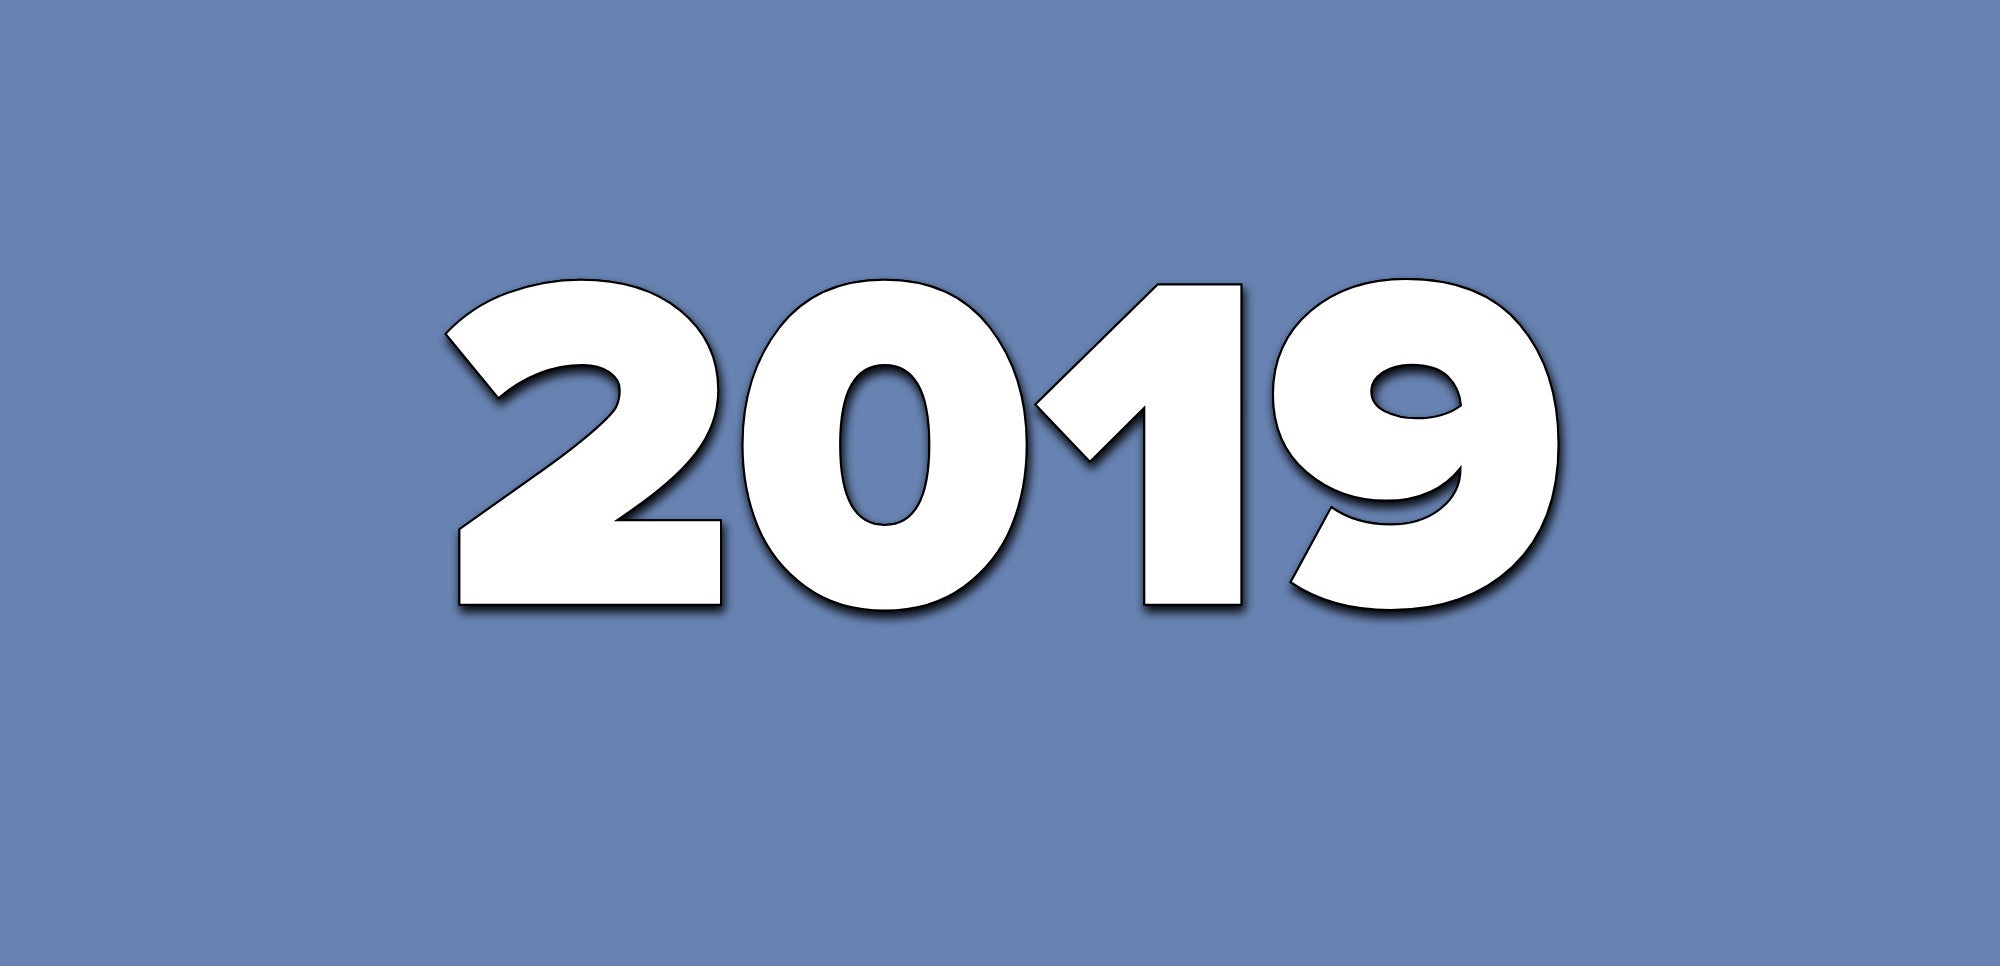 A blue background with text that says 2019